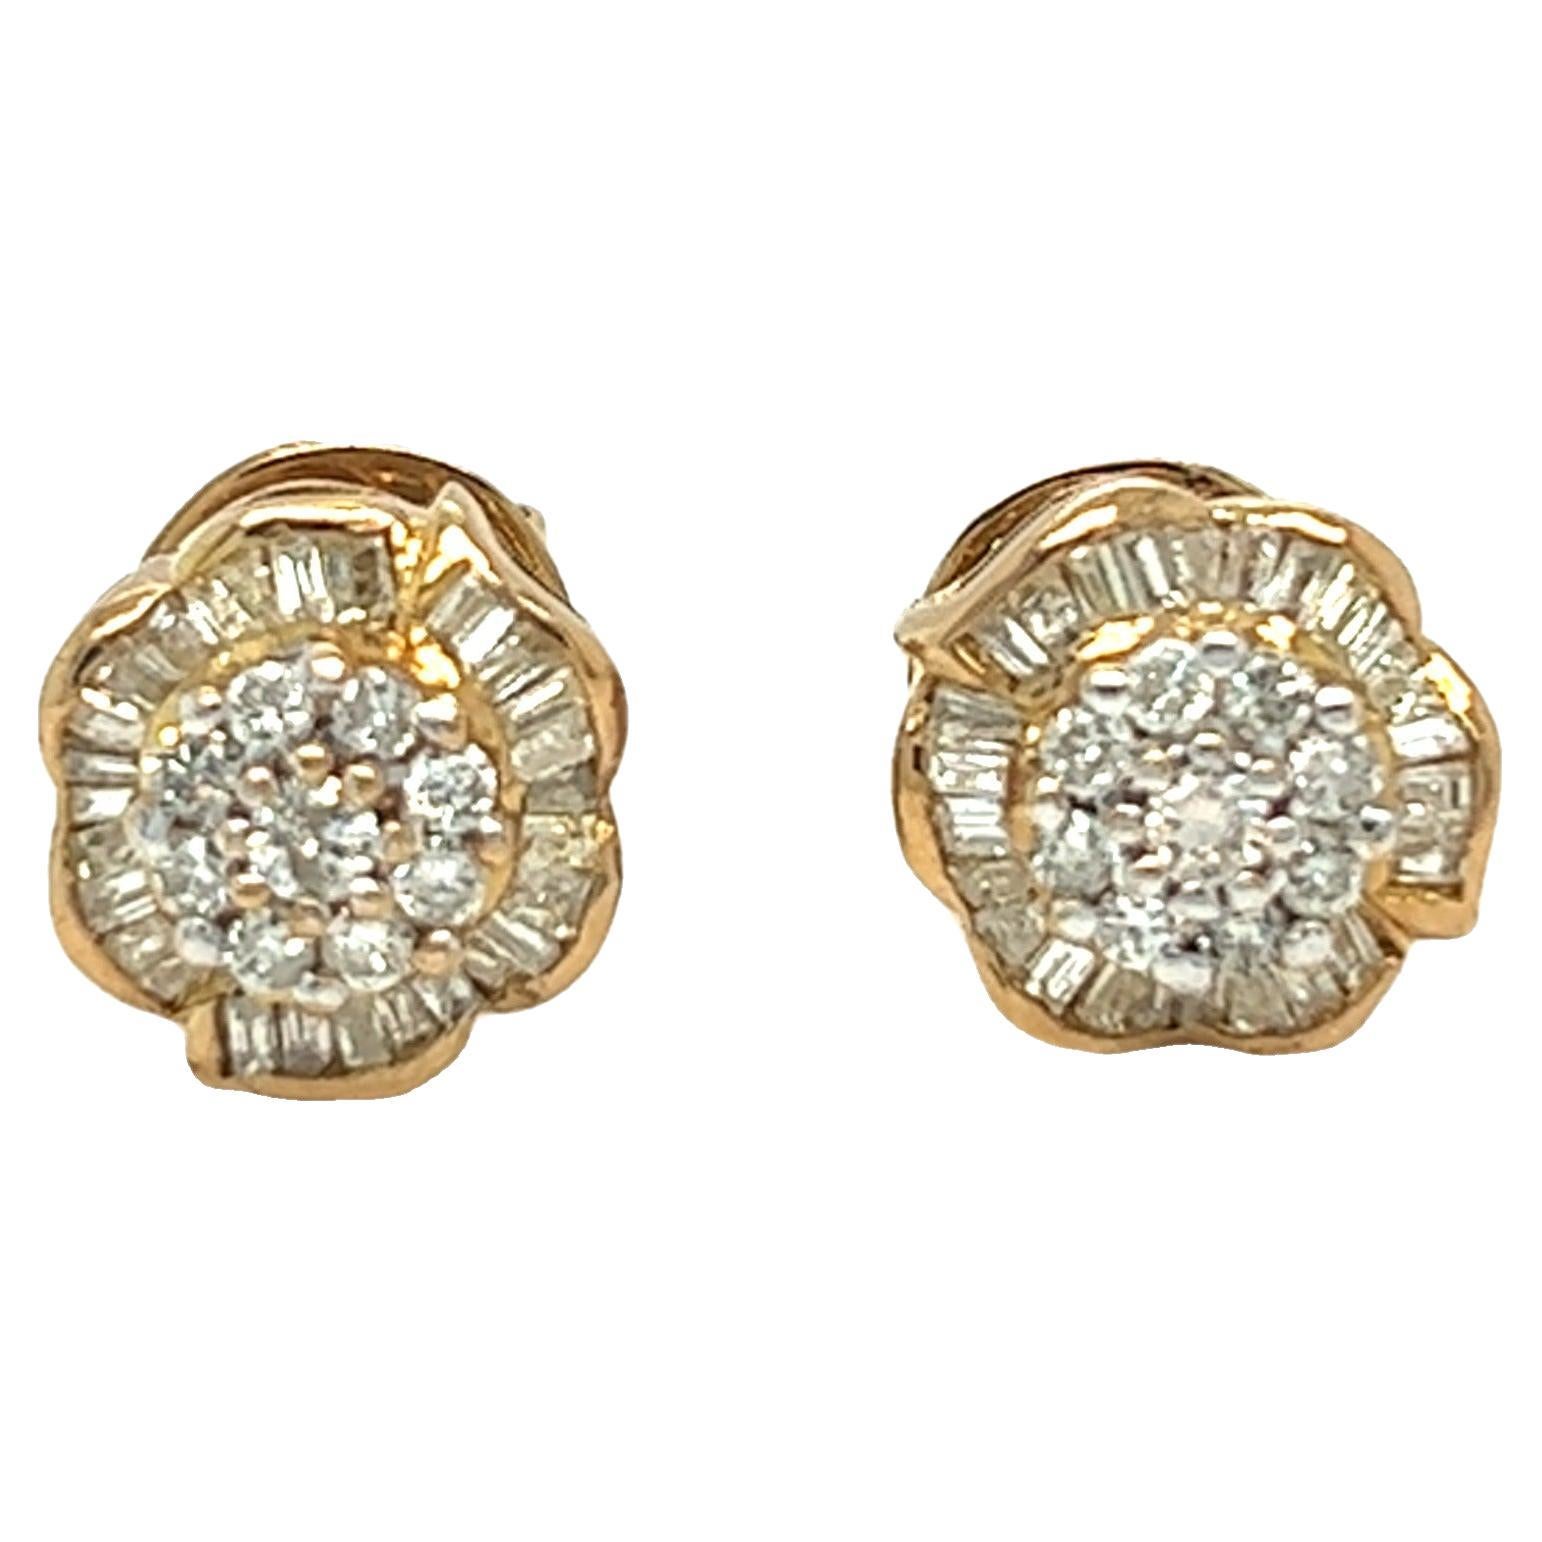 Vintage Flower Cluster Round and Baguette Diamond Earrings 14k Yellow Gold